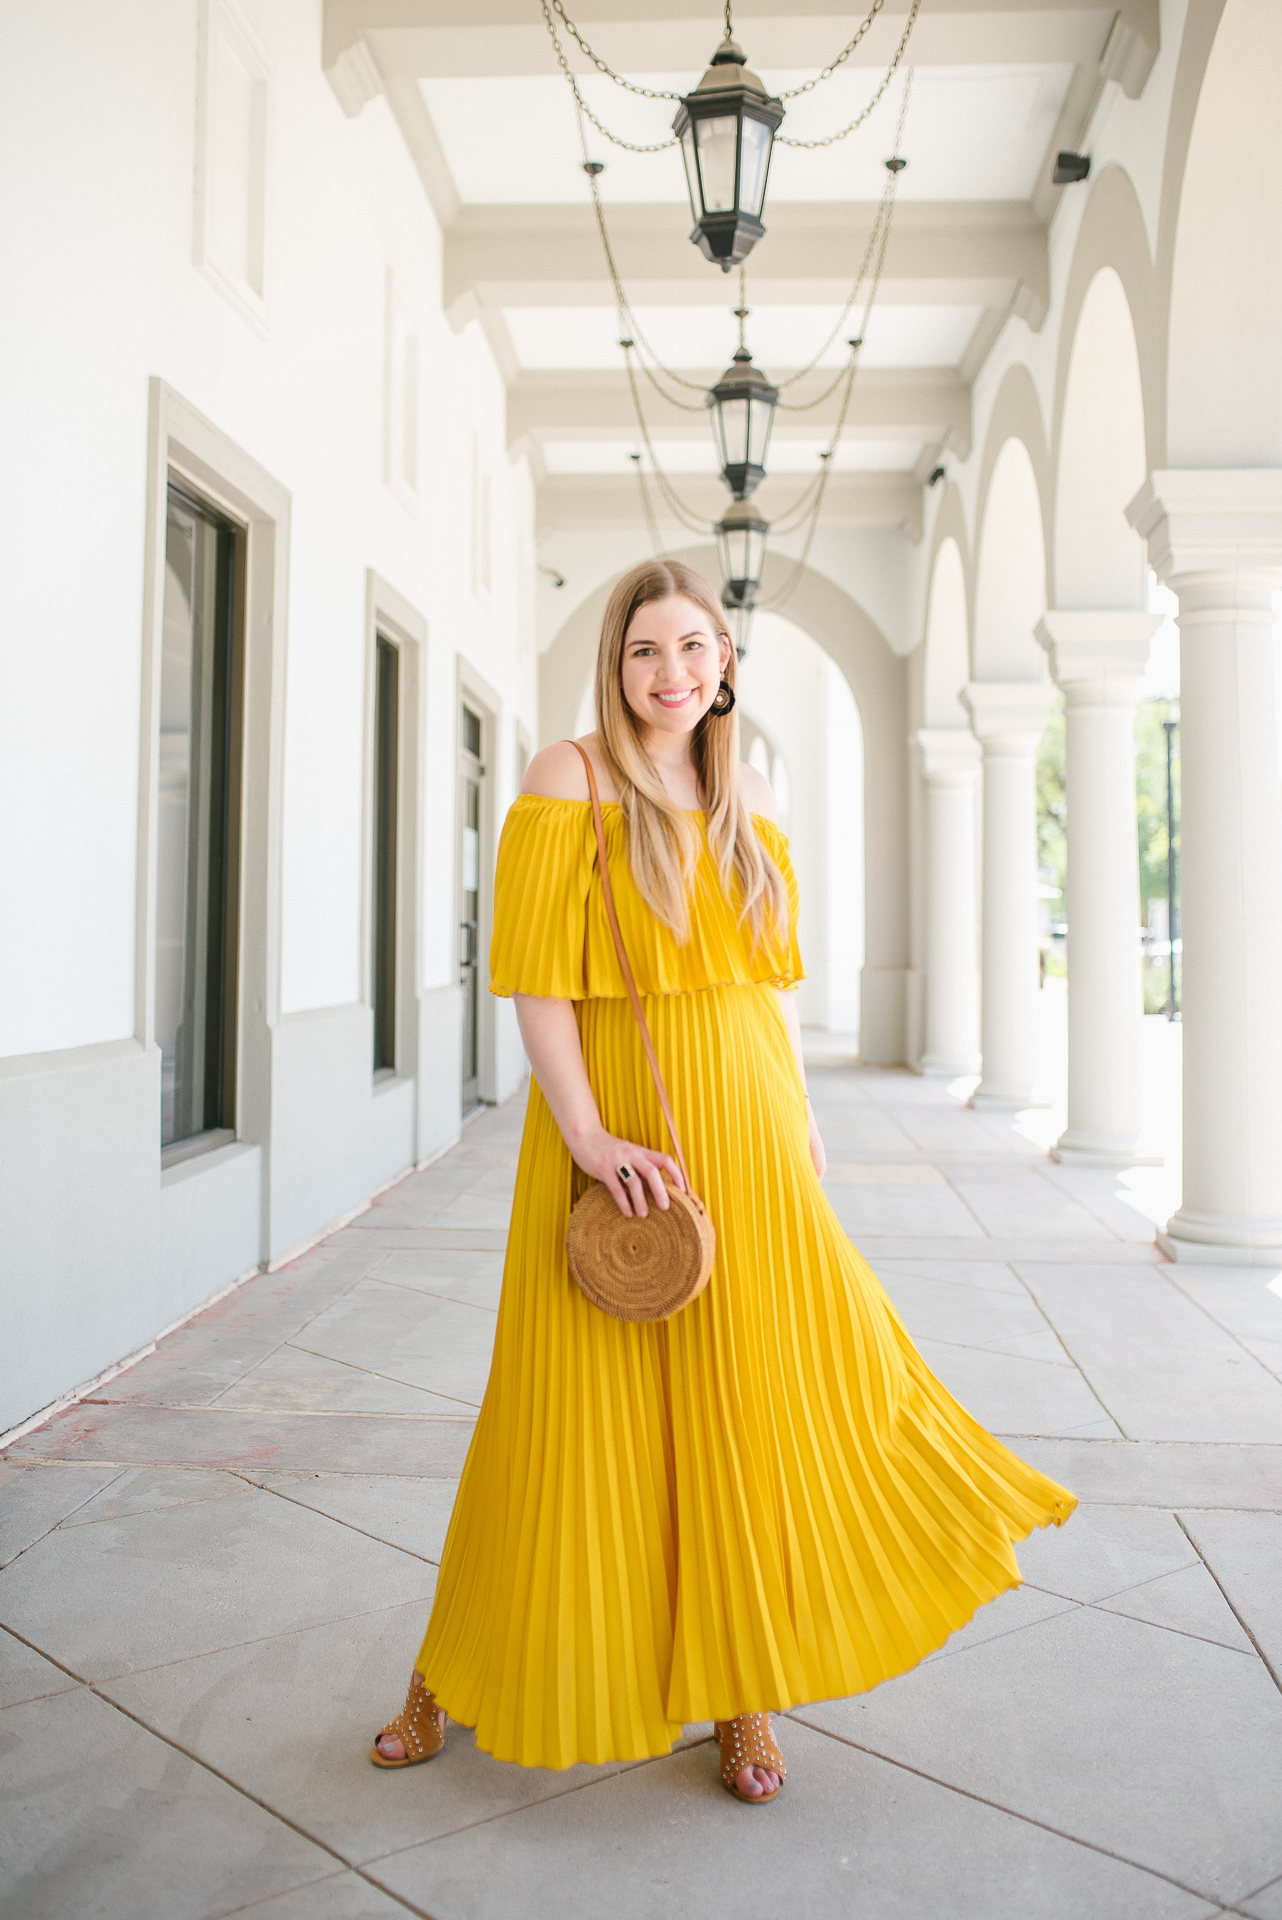 8 Amazing Dresses for Summer Travel - Yellow Pleated Maxi Dress worn by Cup of Charisma Jillian Goltzman Houston Fashion Blogger 1